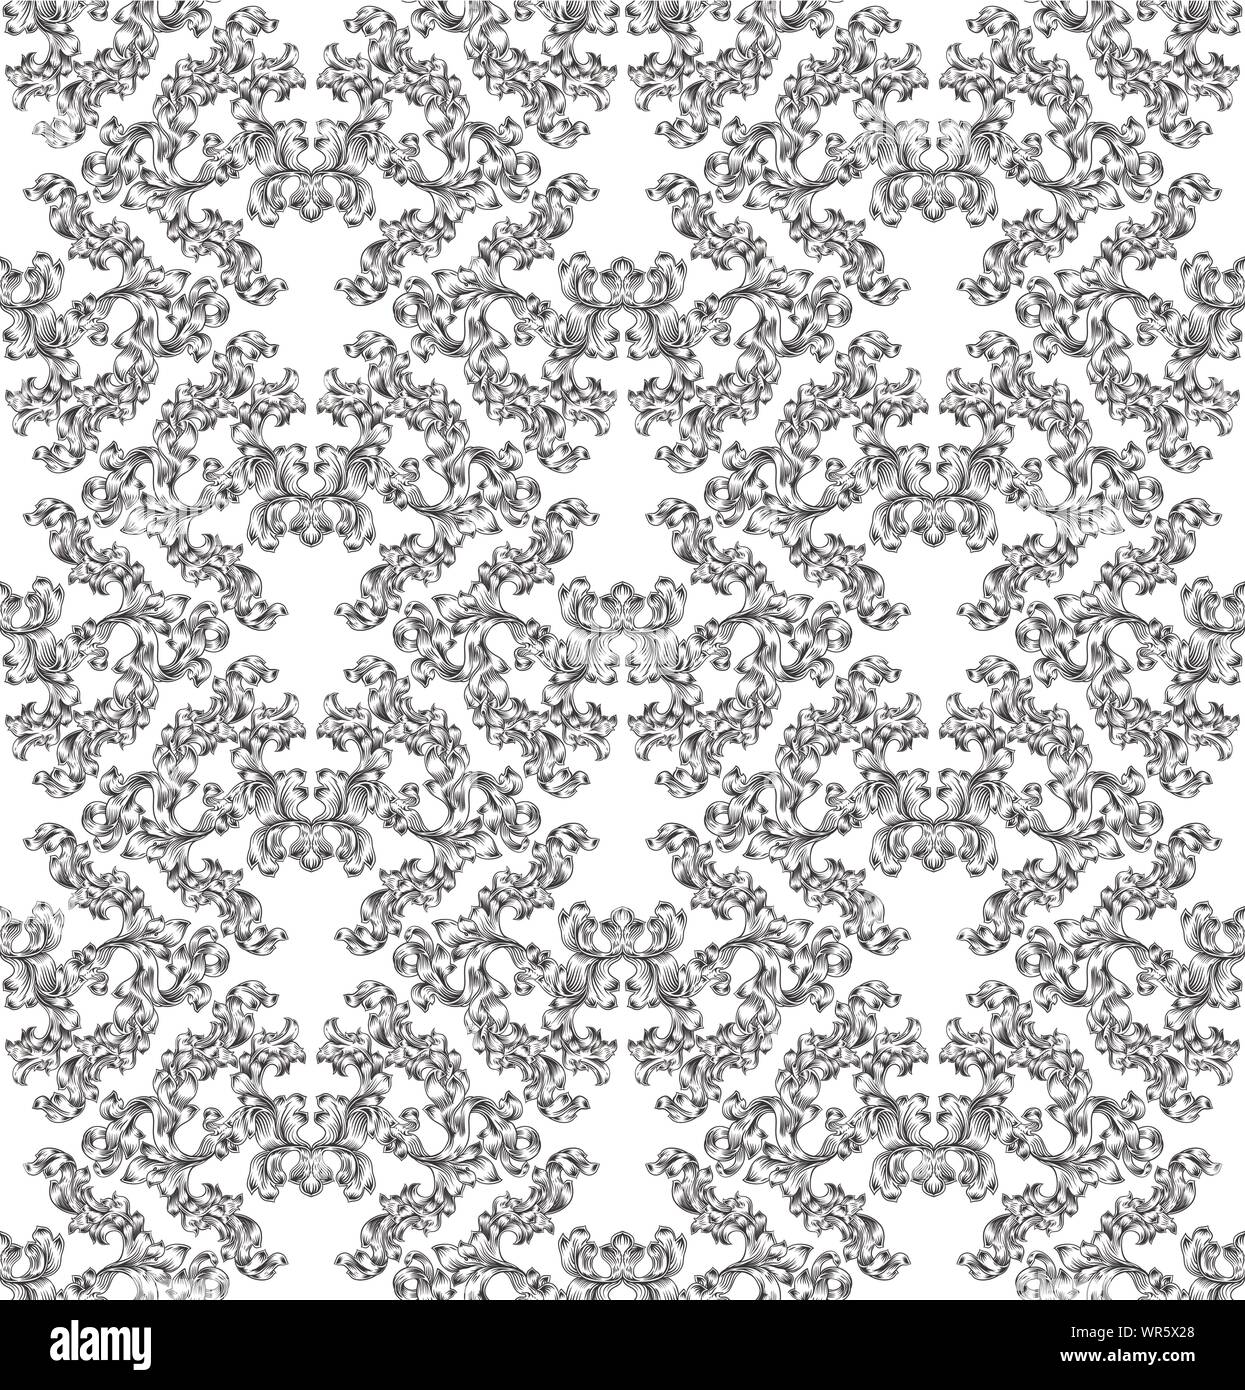 Floral Motif Scroll Pattern Seamless Tile Stock Vector